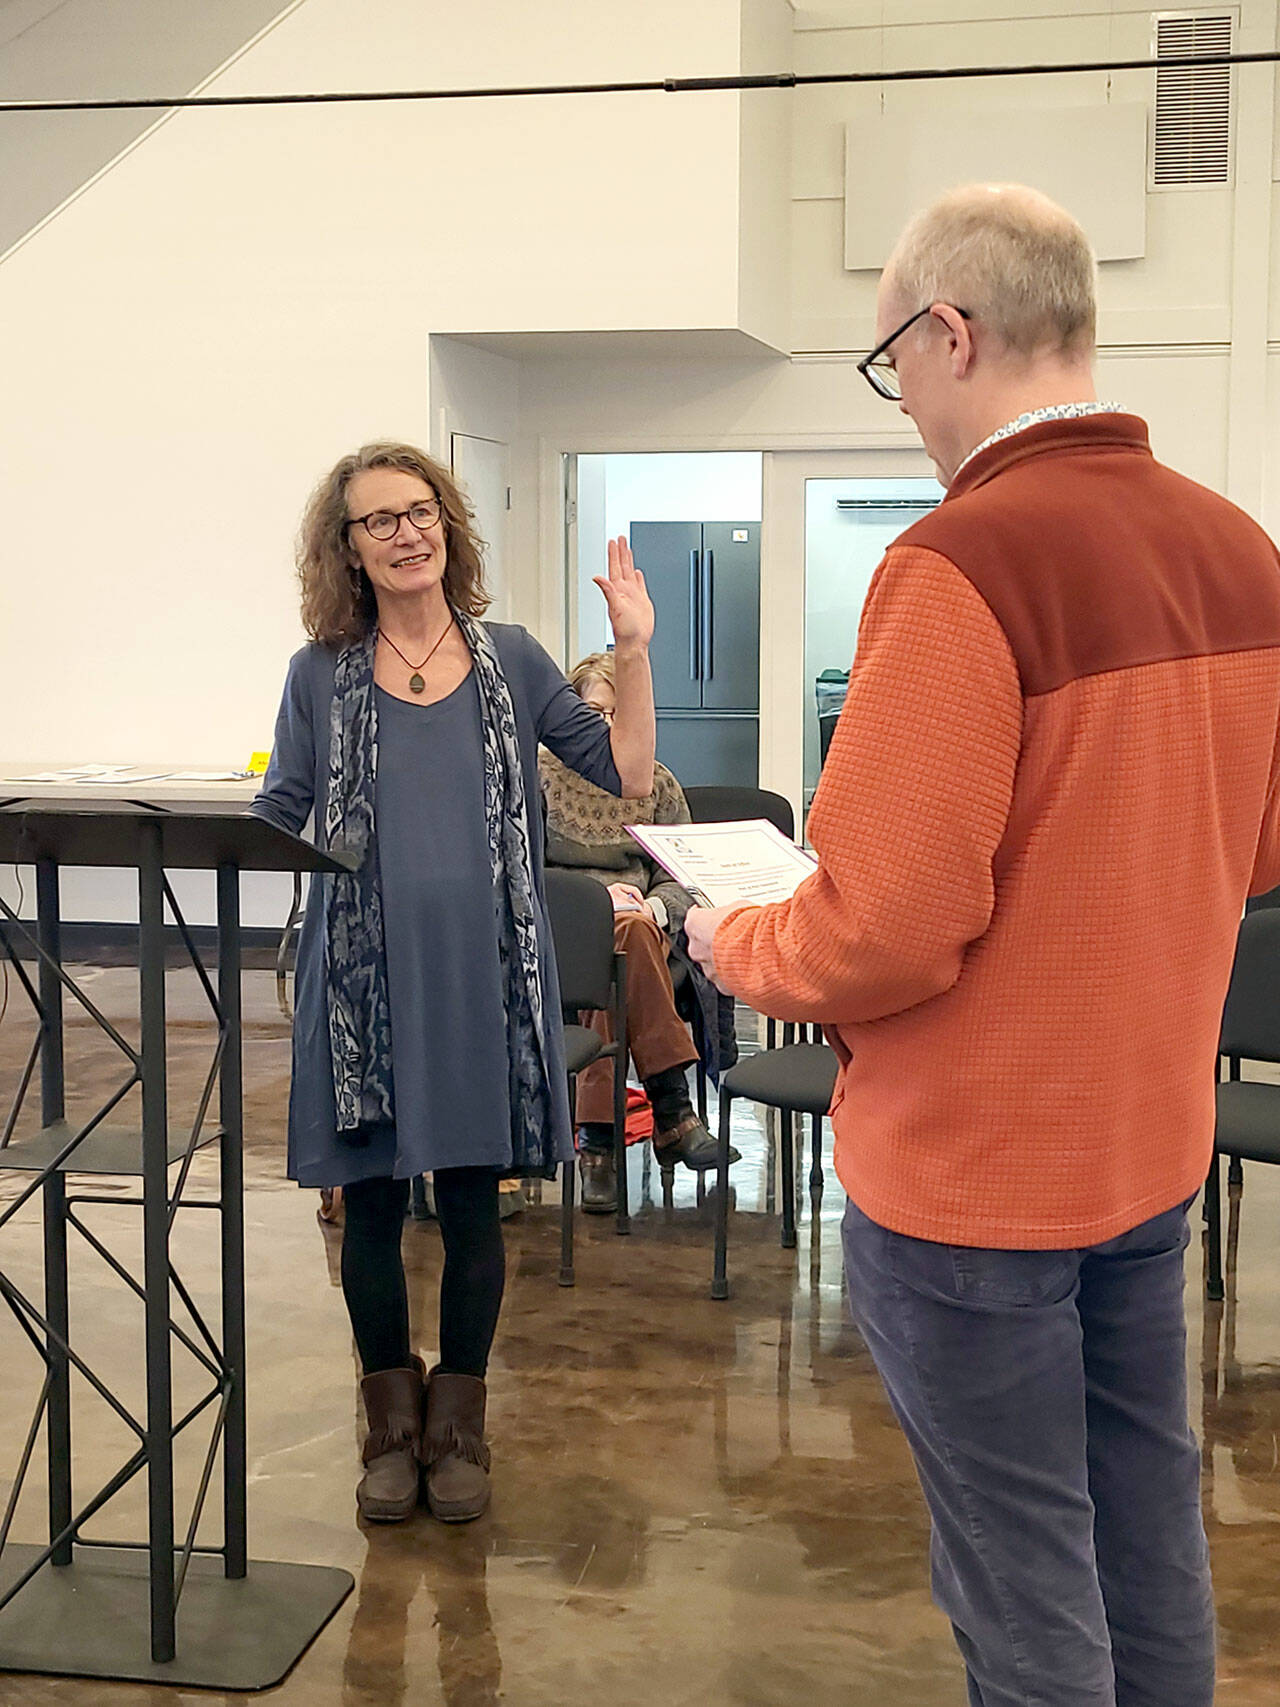 Pam Petranek, left, is sworn in for her second term as a Port of Port Townsend commissioner on Jan. 10 by Executive Director Eron Berg. (Photo courtesy Port of Port Townsend)